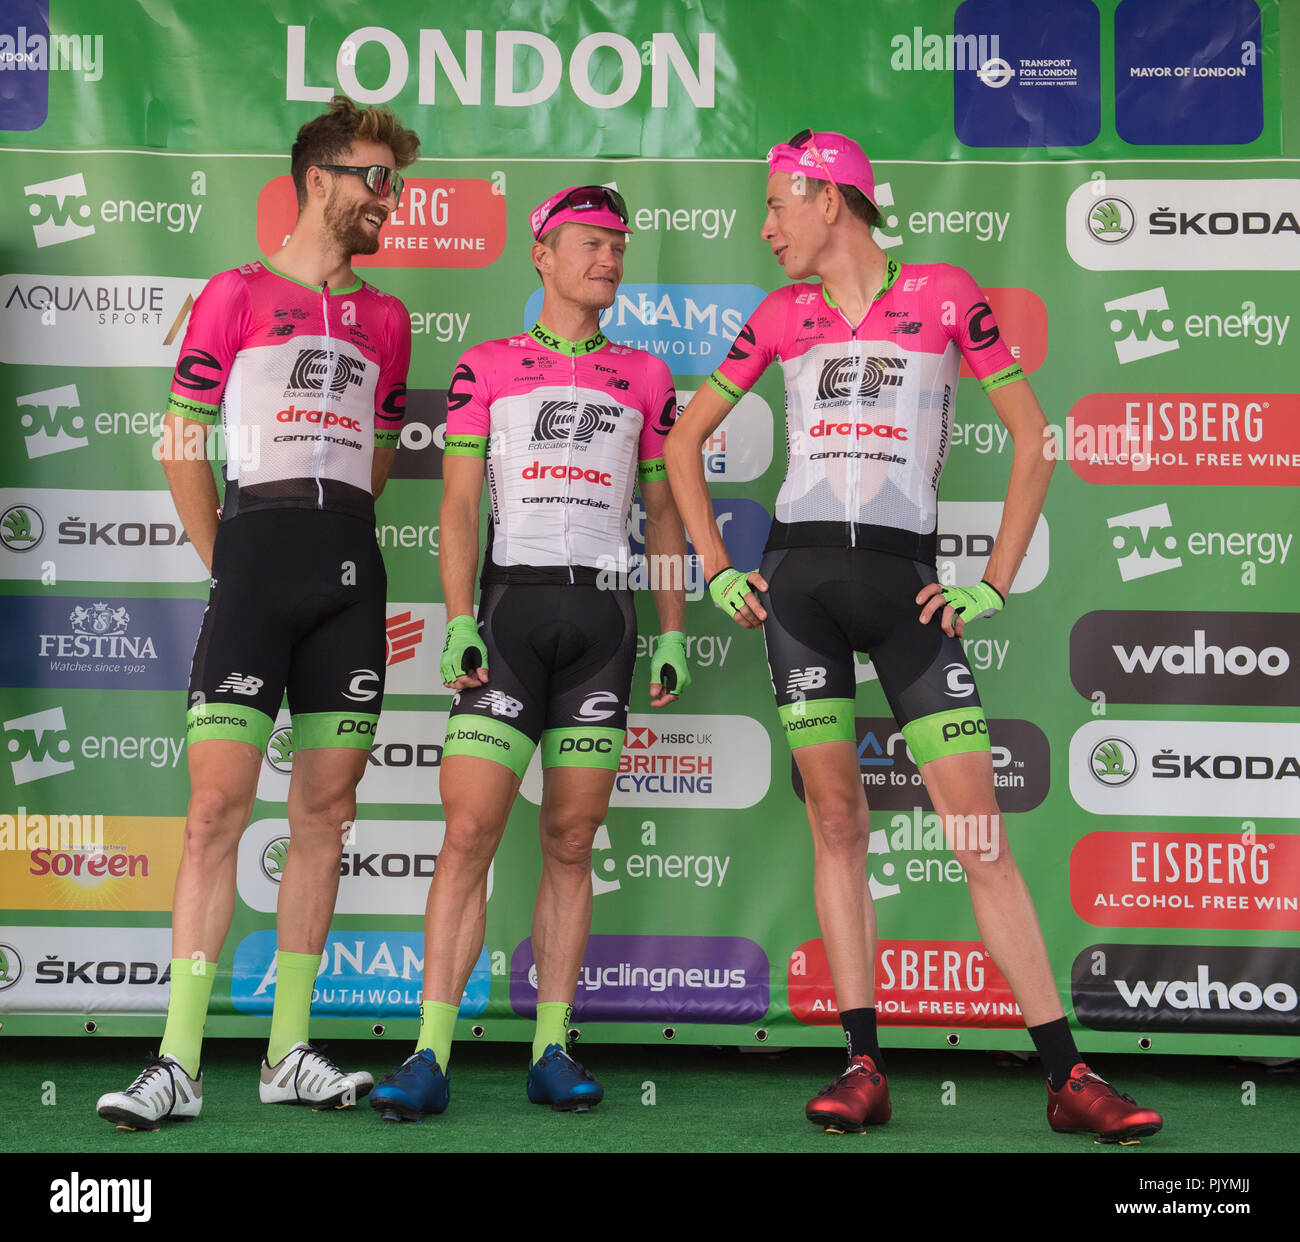 London, UK. 9 September, 2018. The OVO Energy Tour of Britain London Stage 8 concludes with a 14 lap circuit in central London on closed roads in front of large crowds and covering 77km at speeds of up to 80kph, starting and finishing on Regent Street St James’s close to Piccadilly Circus. Team am Ef Education First - Drapac P/B Cannondale are introduced to the crowds before race start. Credit: Malcolm Park/Alamy Live News. Stock Photo